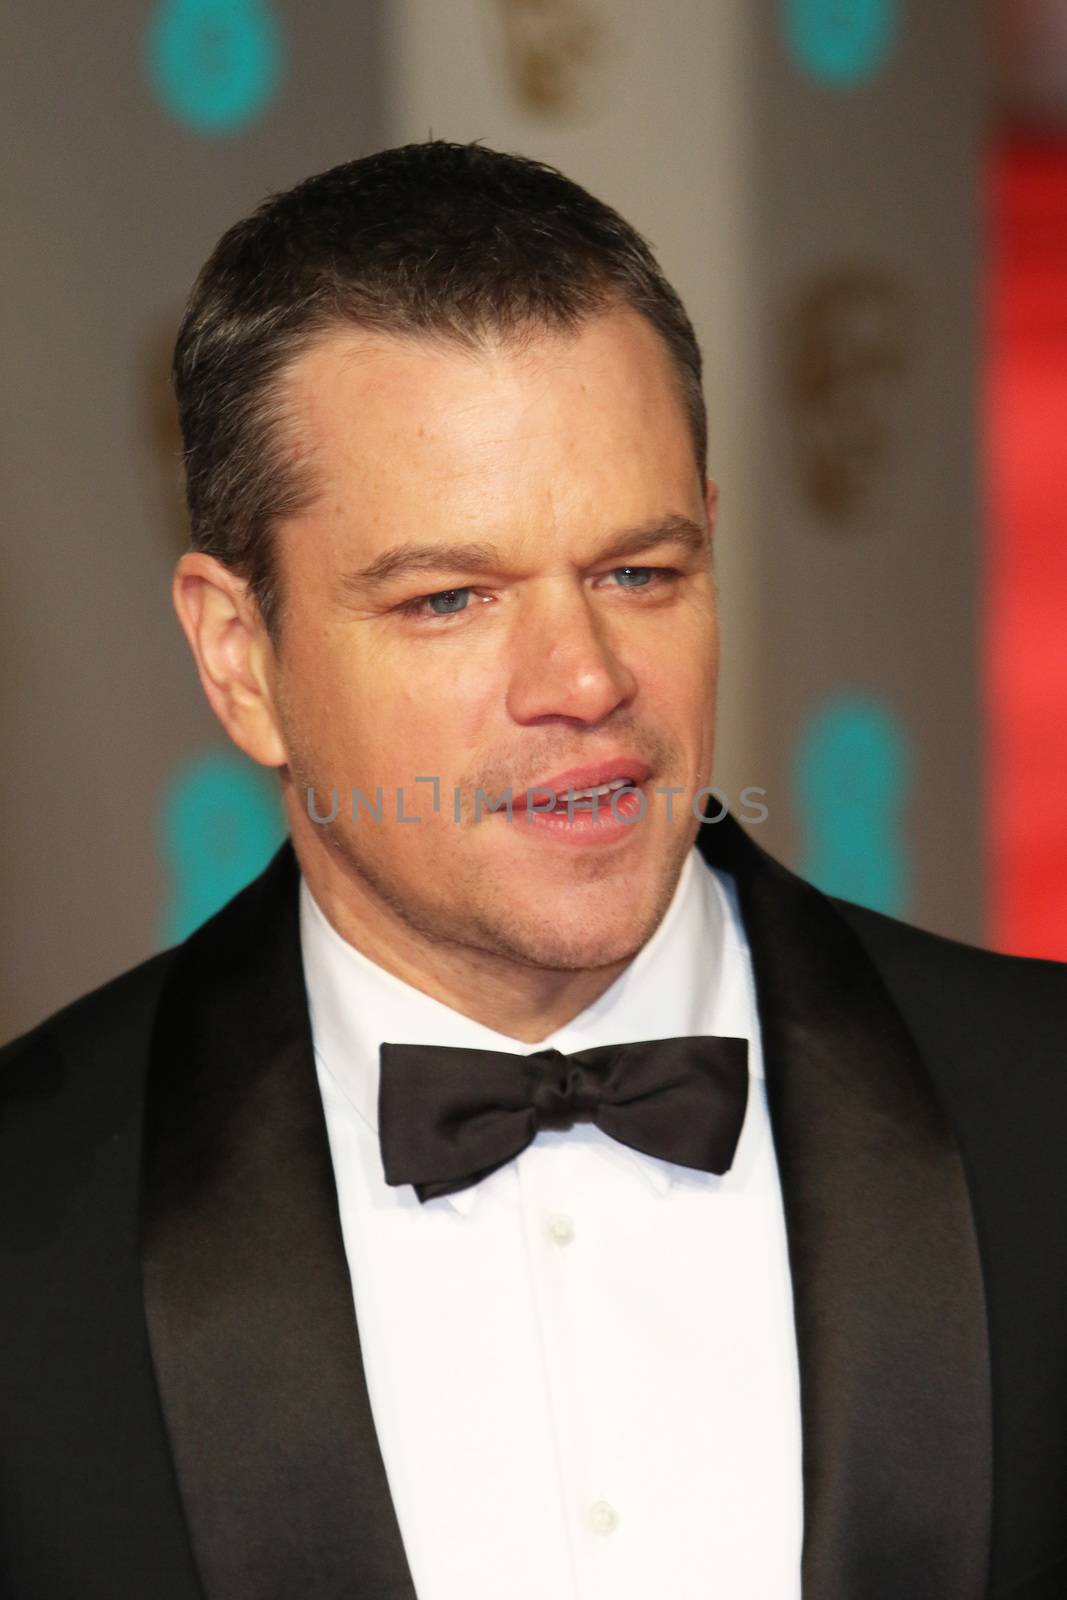 UK, London: American actor Matt Damon poses on the red Carpet at the EE British Academy Film Awards, BAFTA Awards, at the Royal Opera House in London, England, on 14 February 2016.